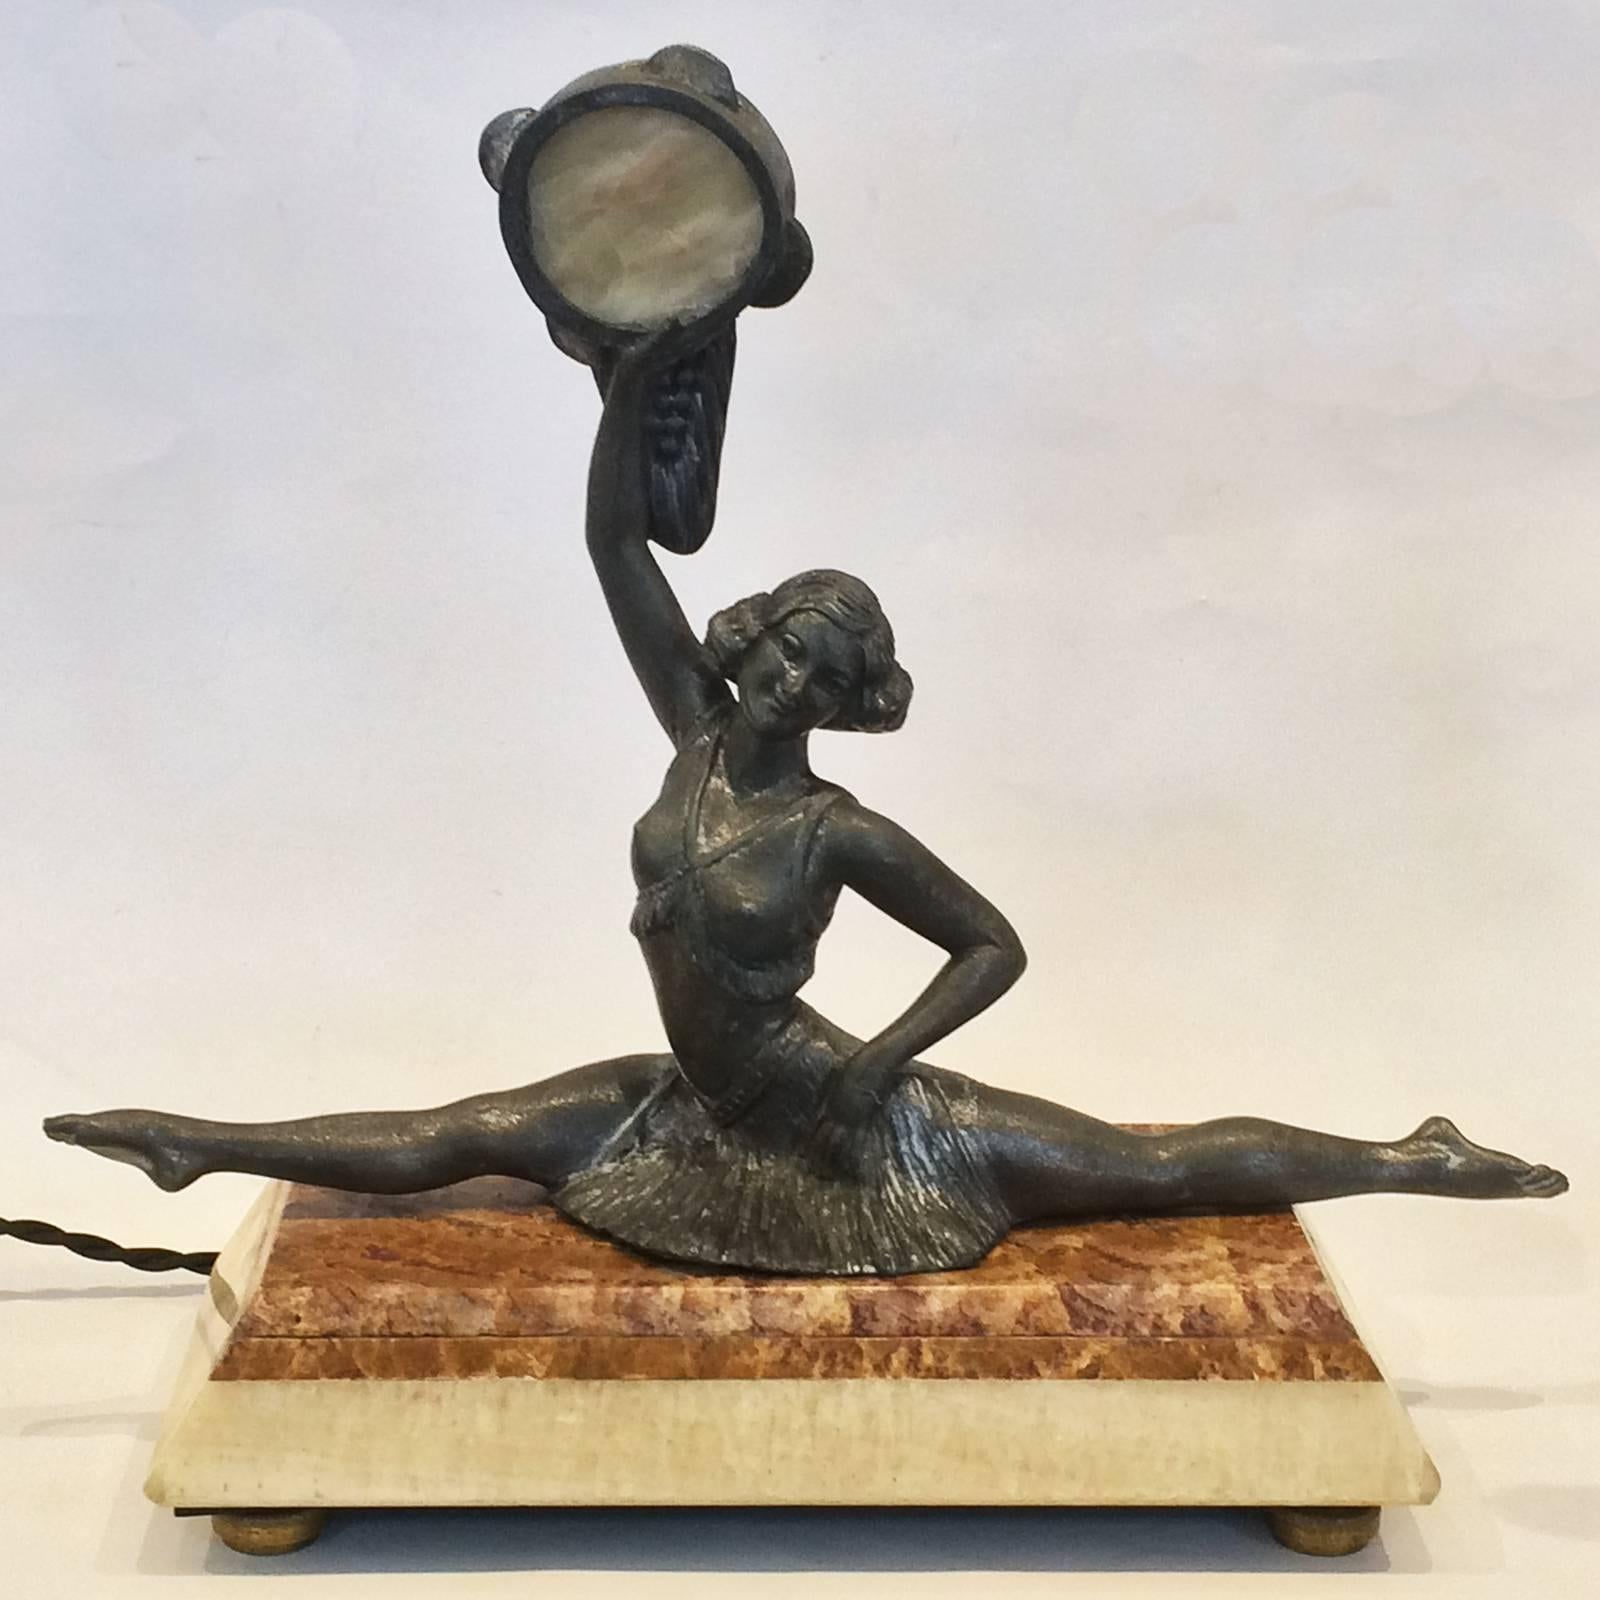 Art Deco lamp, “Tambourine Dancer” by Balleste, France. Rare design and totally original, aged patina, still with the translucent Alabaster disc within the Tambourine. Finely detailed, Font d' Arte Statue, on an Alabaster and Marble base with 4,